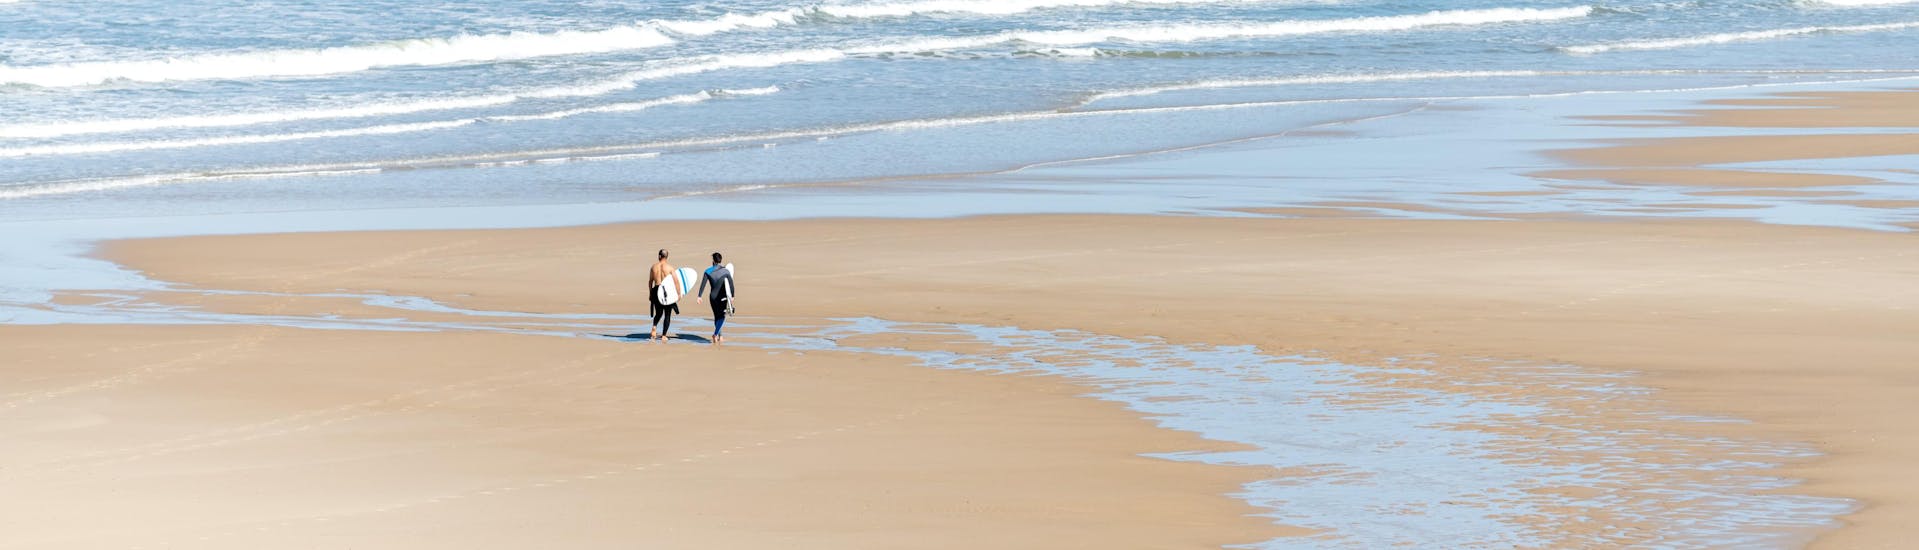 Two men are walking on the beach of Lacanau with their surfboard under their arm, where many surfing lessons take place.